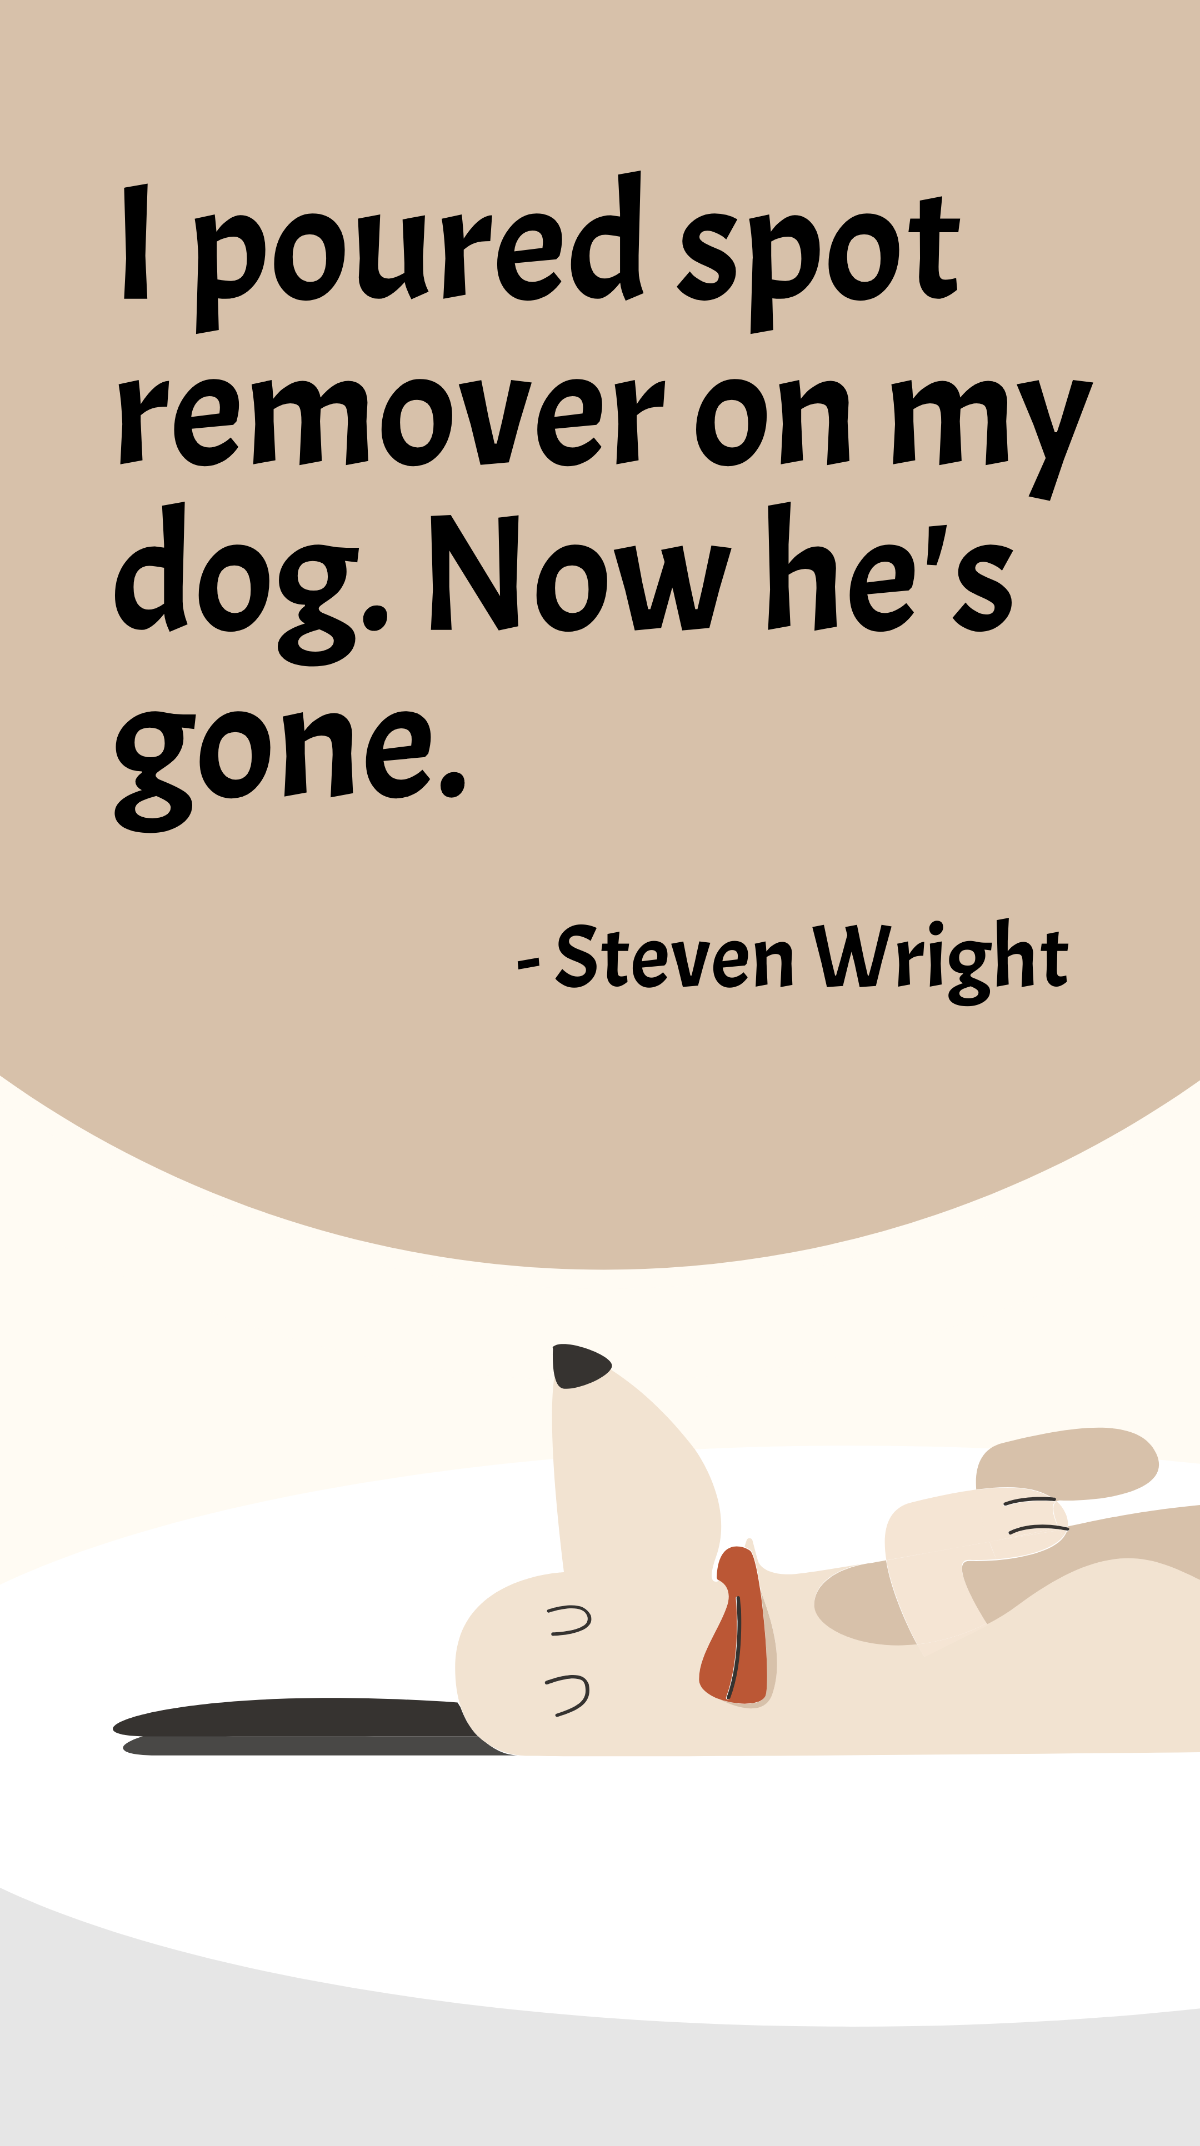 Free Steven Wright - I poured spot remover on my dog. Now he's gone. Template